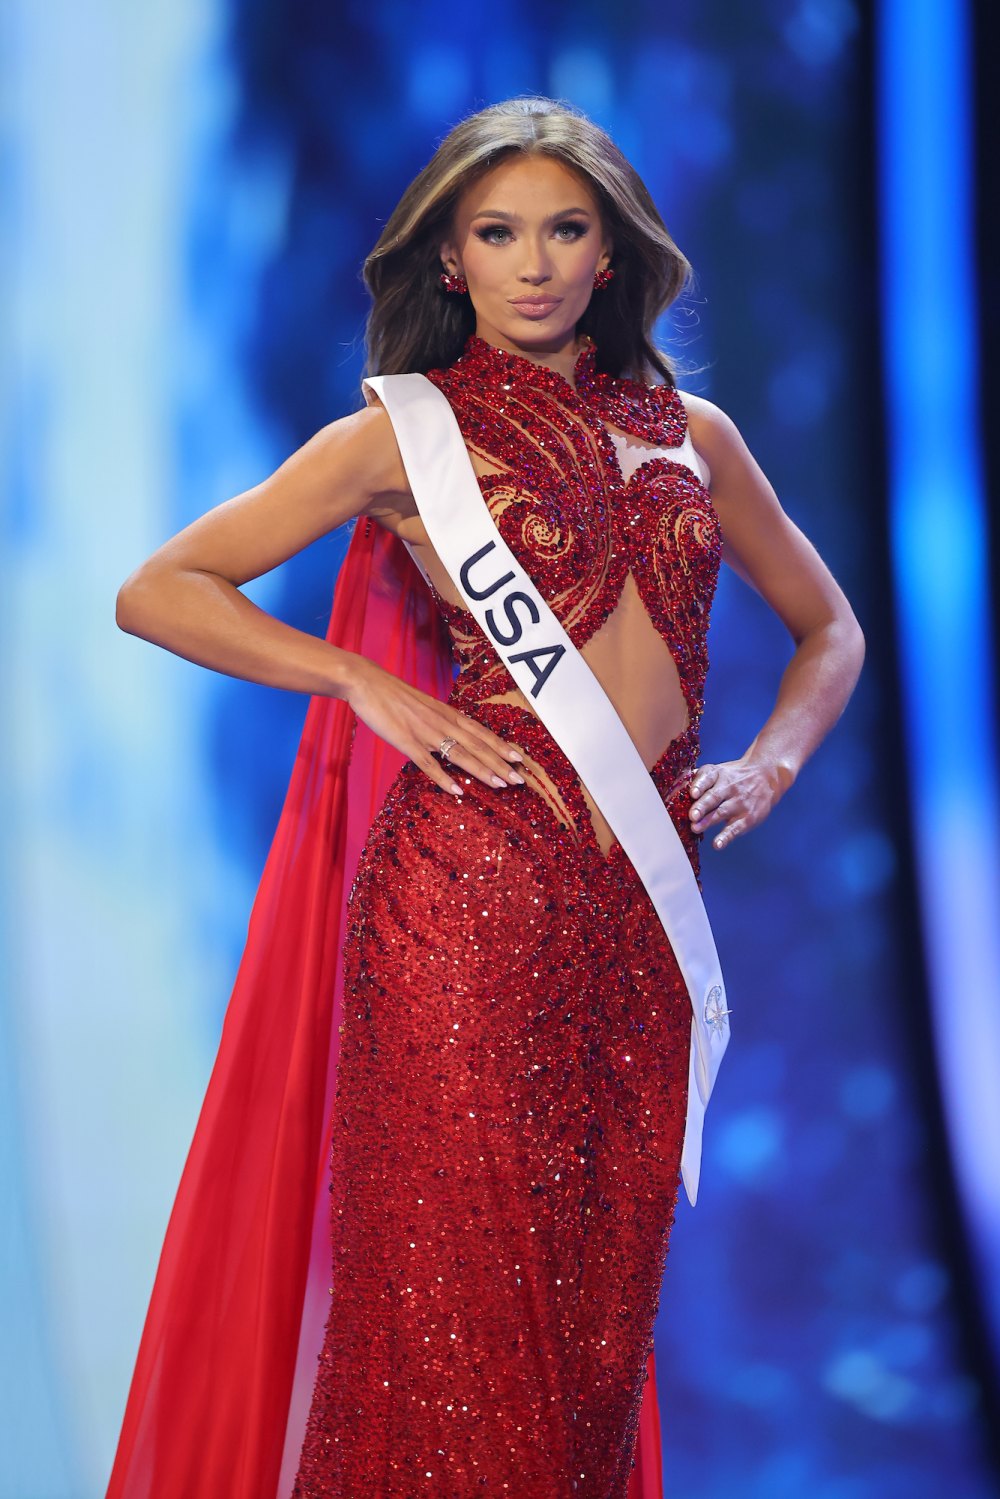 Current Miss USA Noelia Voigt Relinquishes Her Title Due to Mental Health